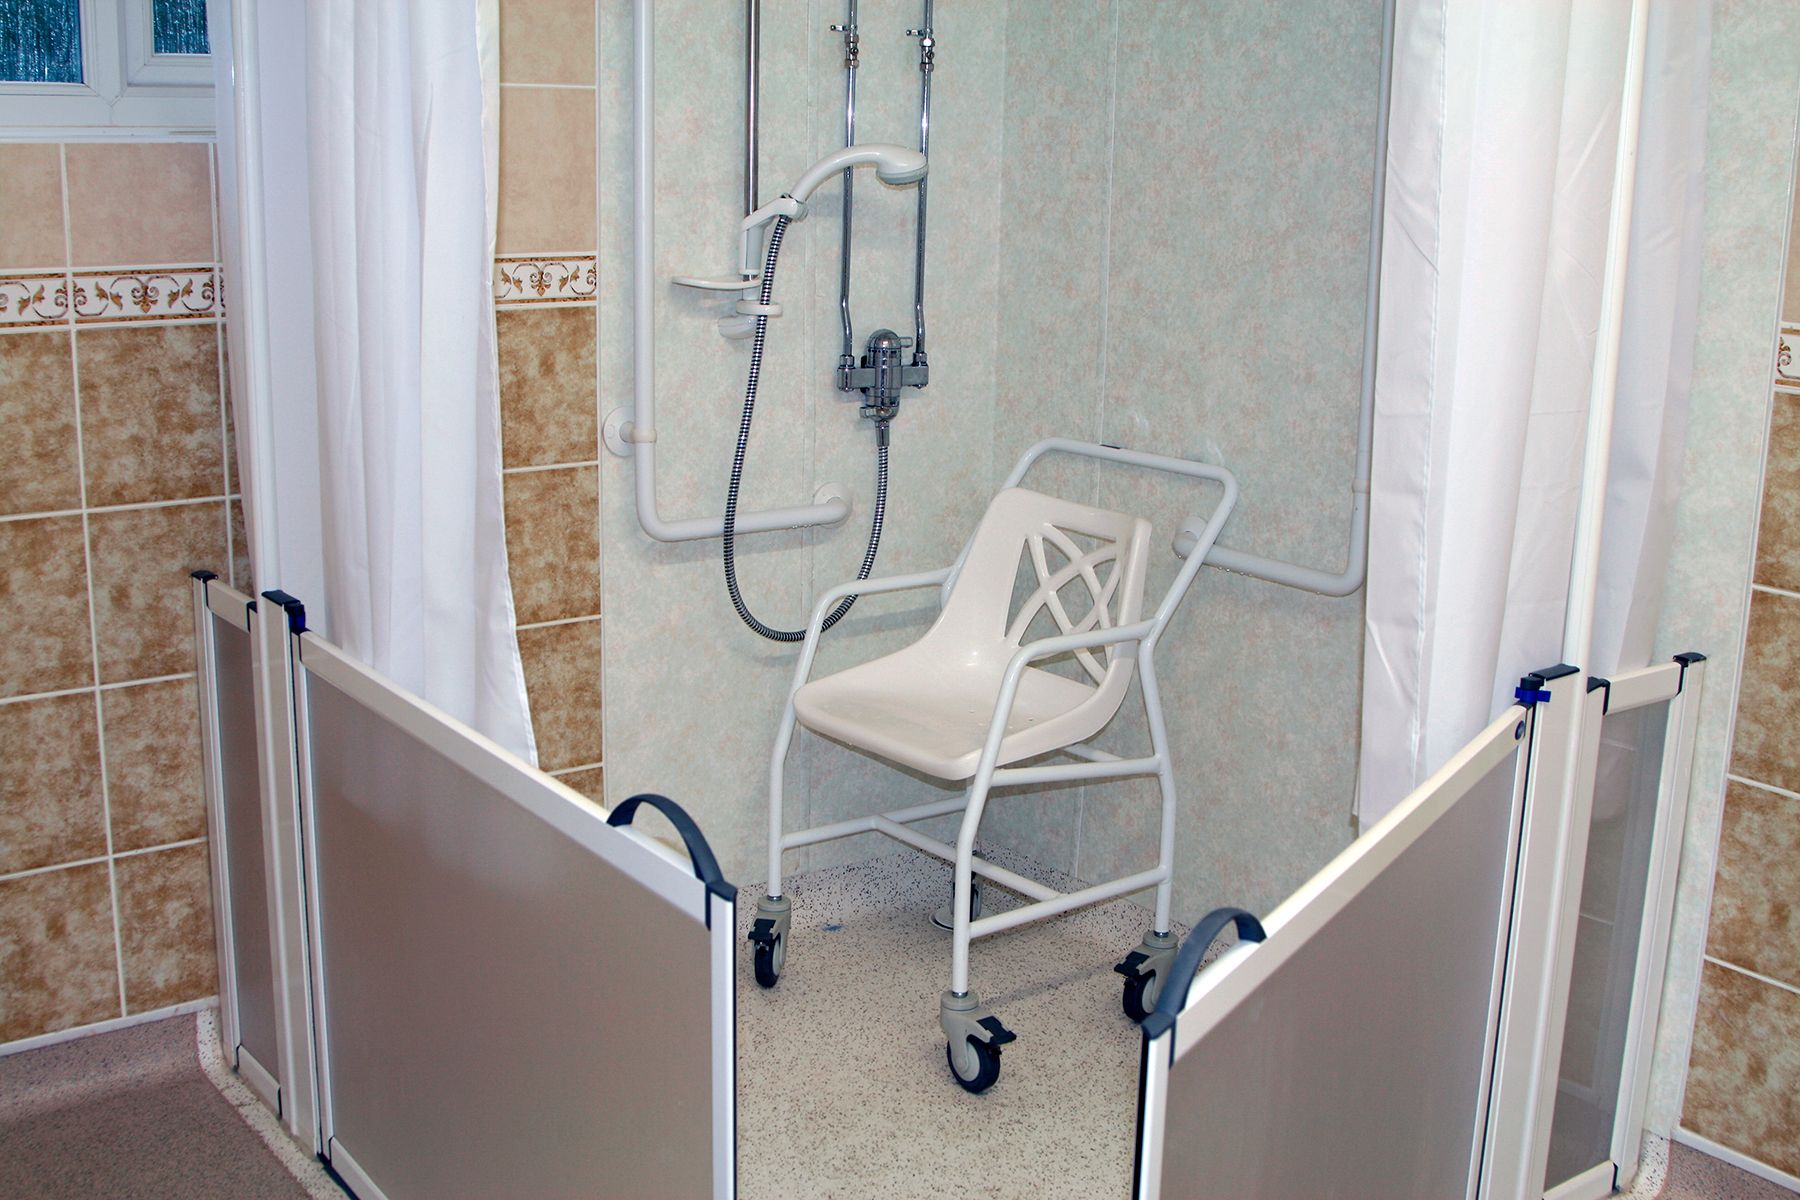 Anapos is our our entry-level wet room, ideal for ensuring safe, accessible bathing within the home.